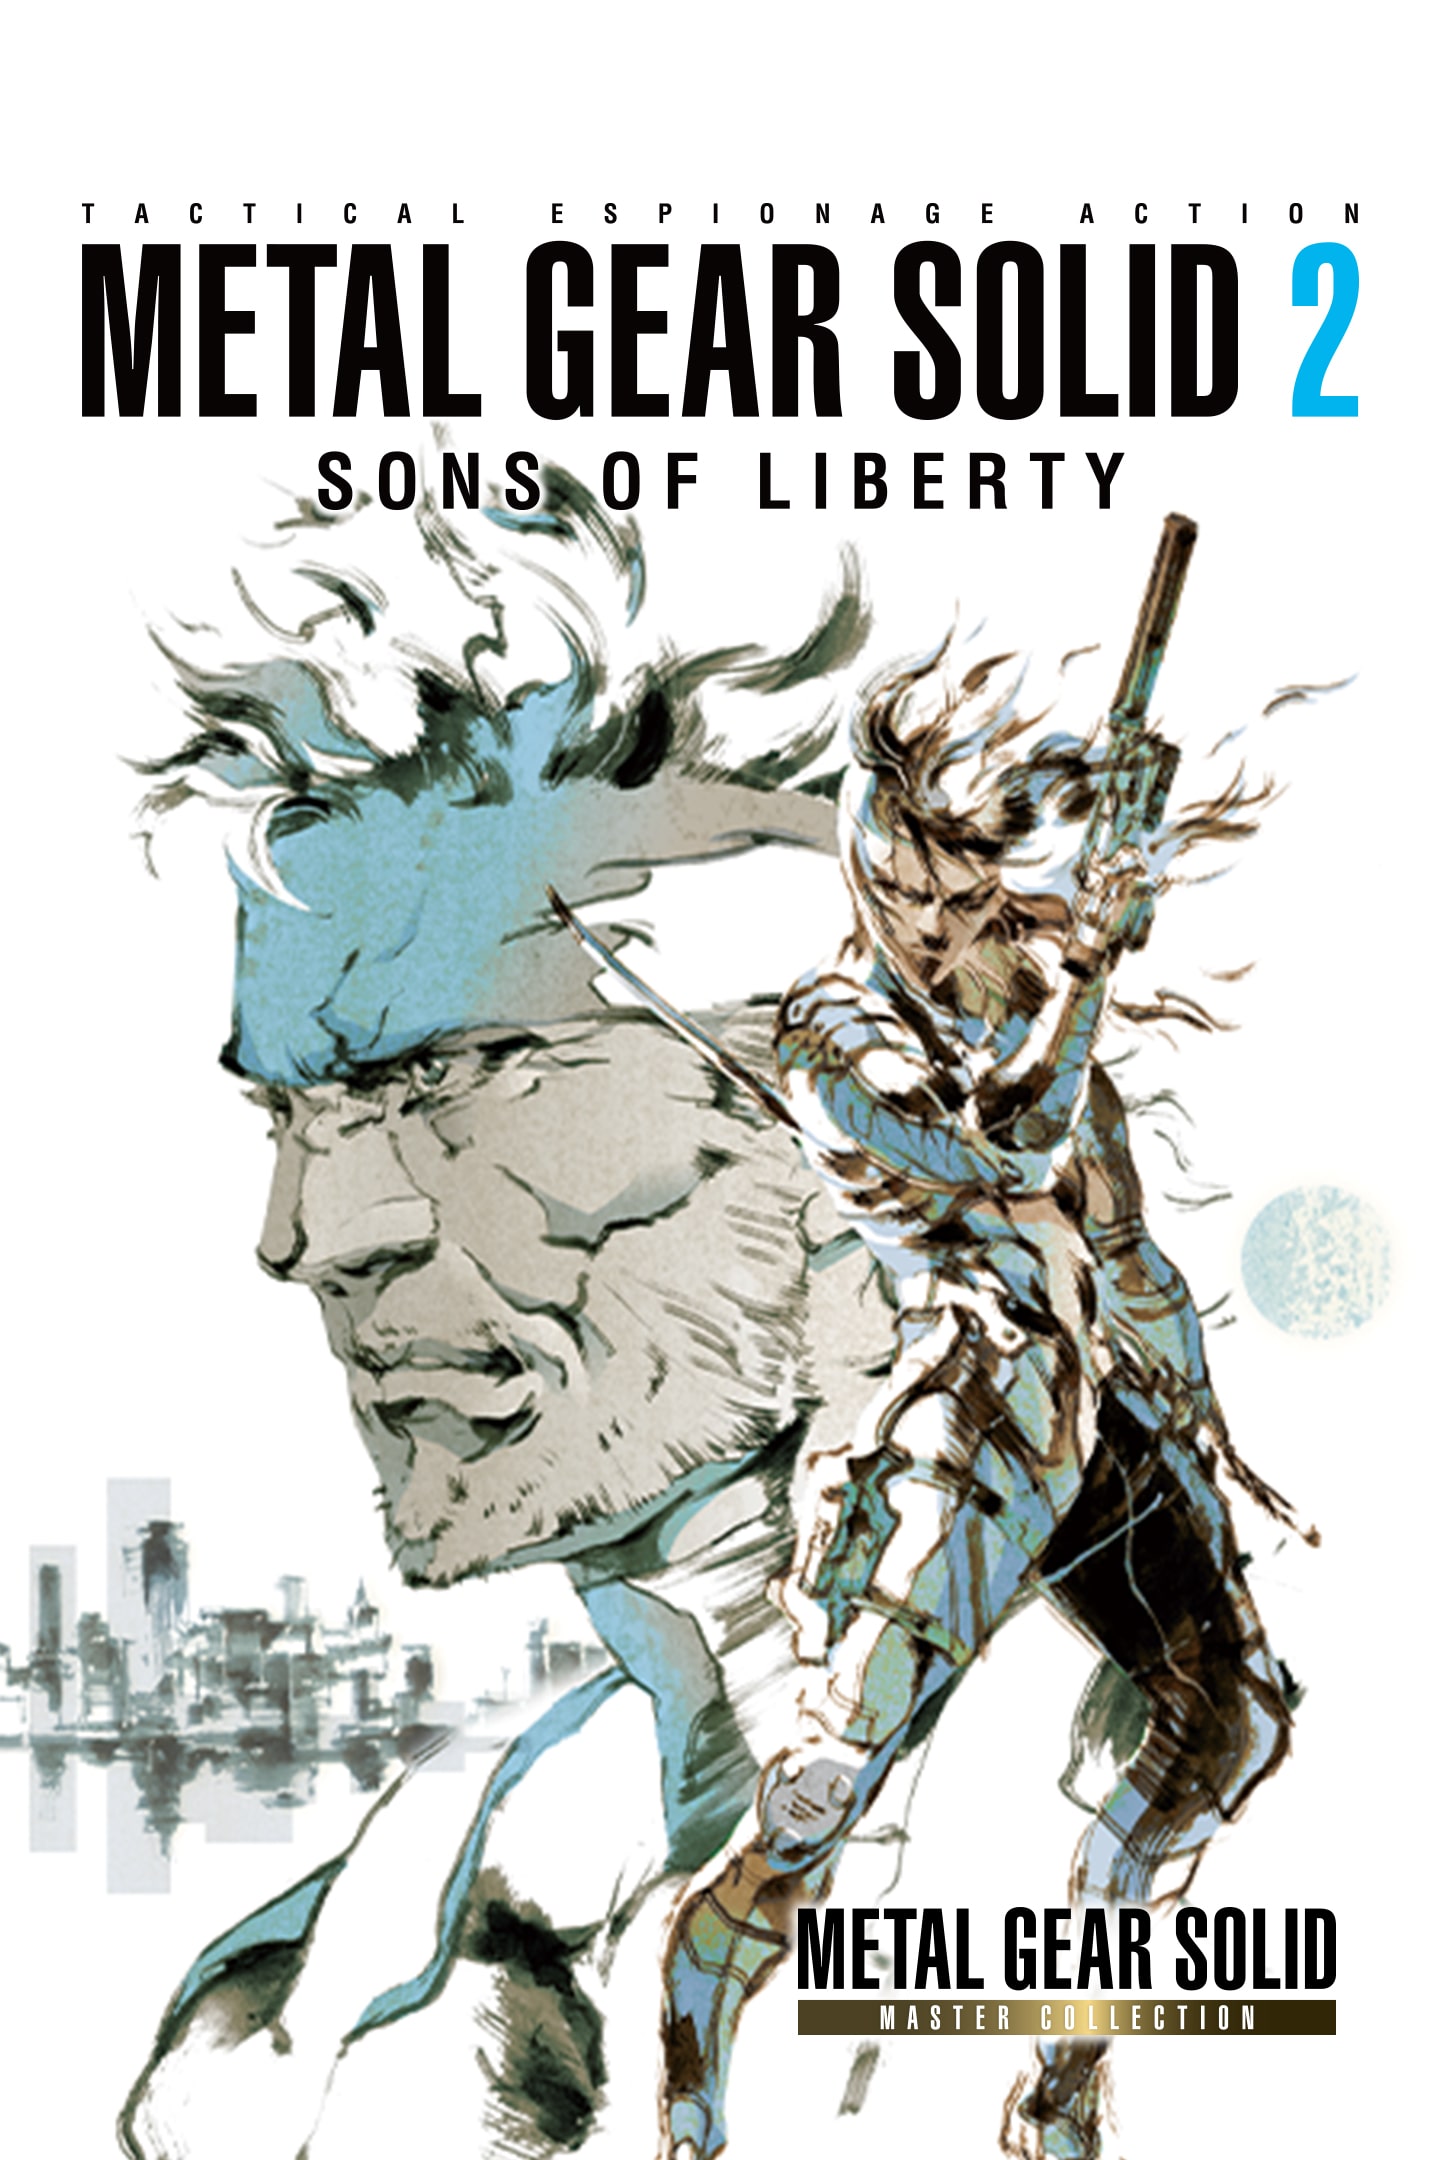 METAL GEAR SOLID2 Sons of Liberty - その他